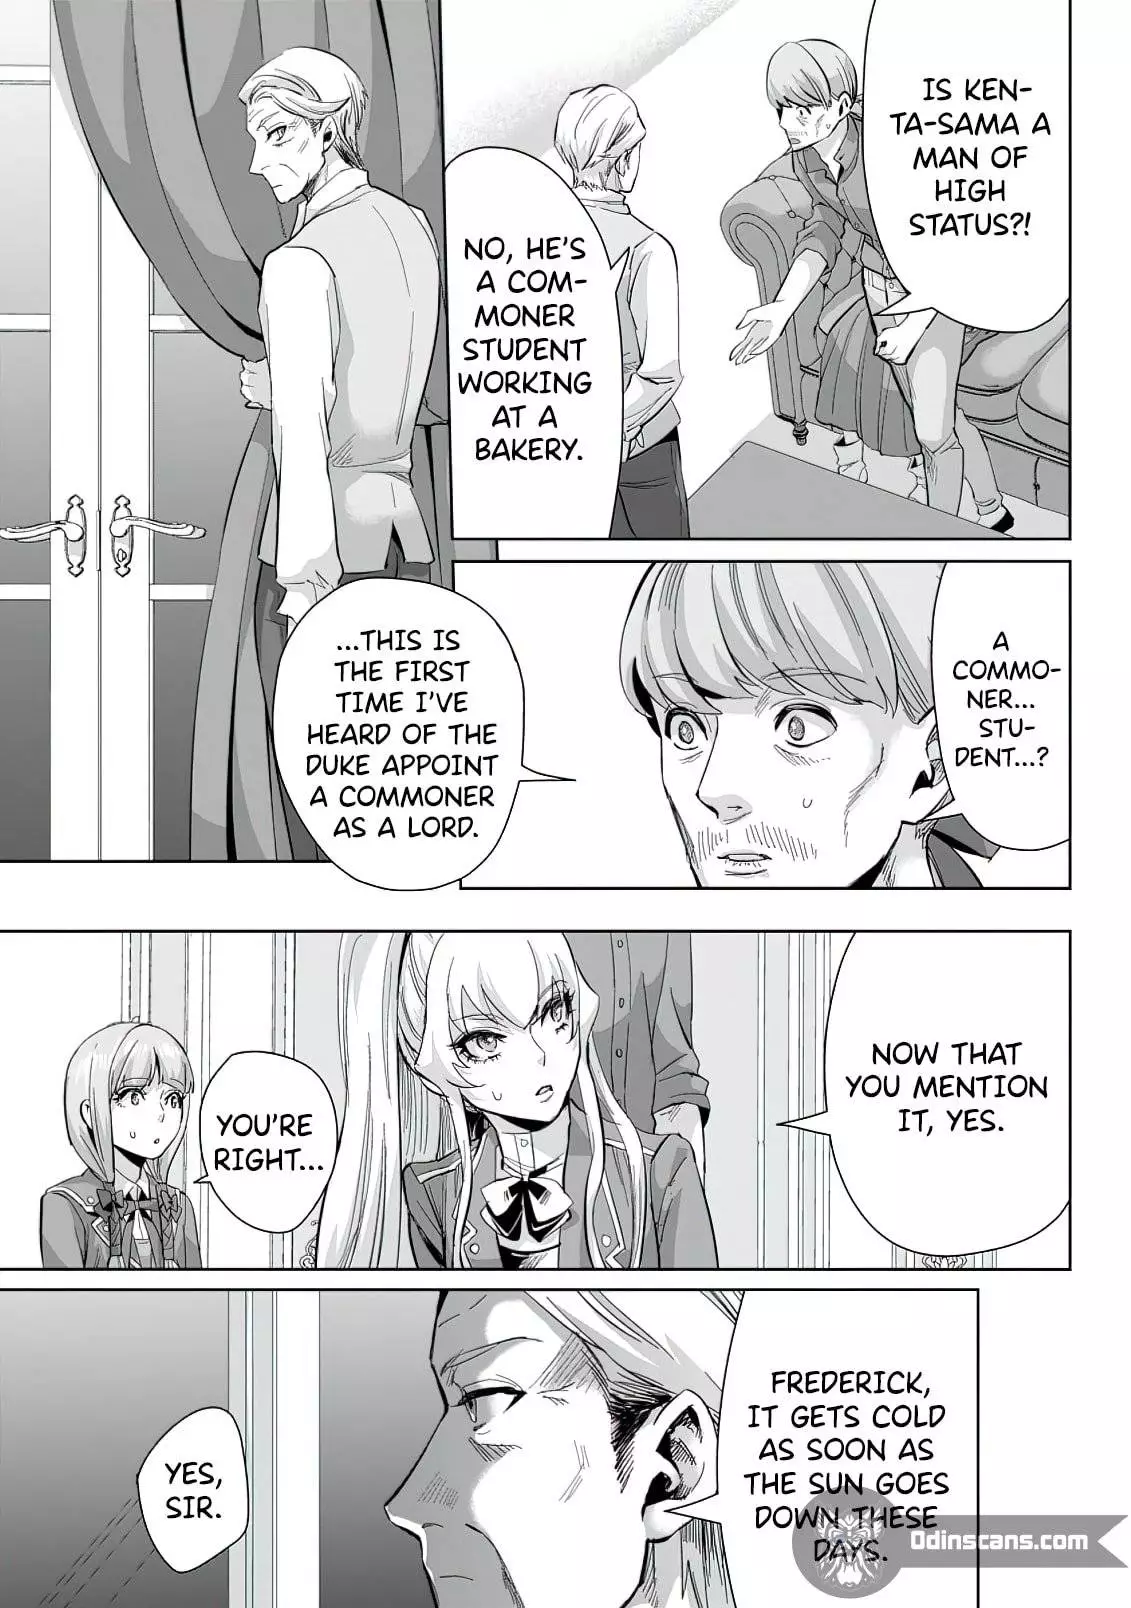 It Seems That I Was Reincarnated Into The World Of A School Otome Game, But I Was A Background Male Student With Cheats. - 9.2 page 2-4ae46b1d